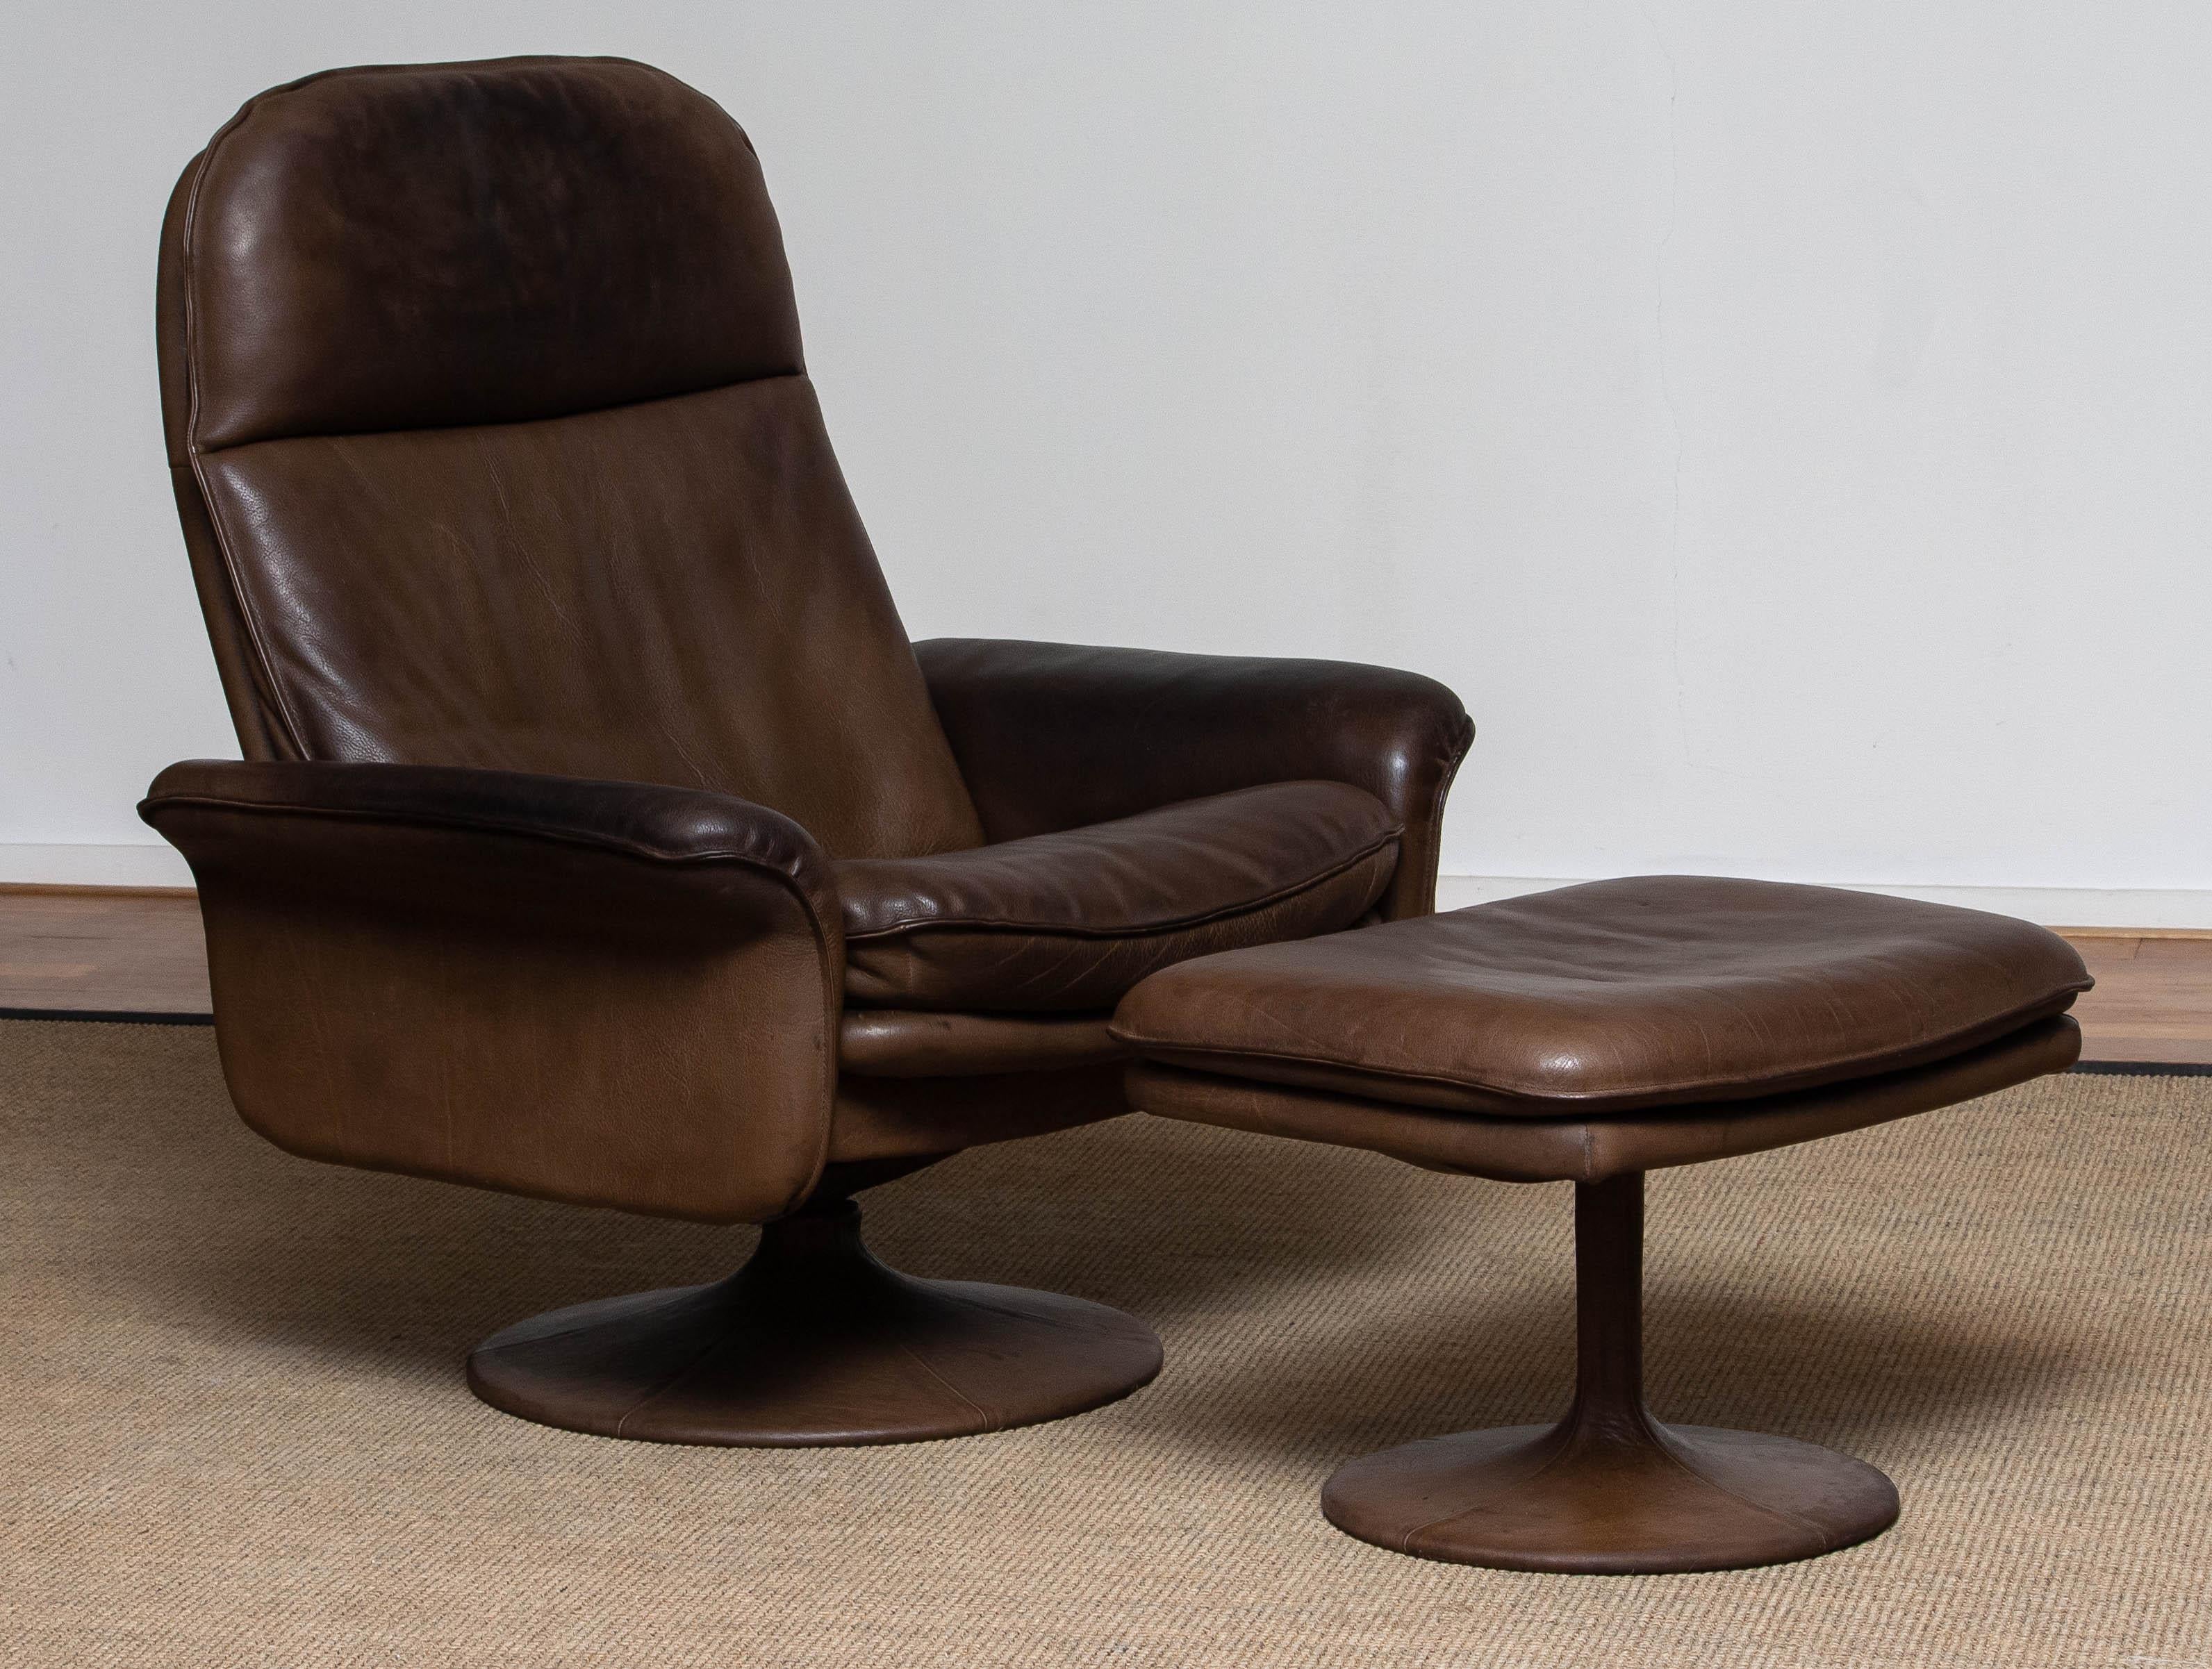 Brutalist 1970's Buffalo Leather Swivel and Relax Chair with Matching Ottoman by De Sede